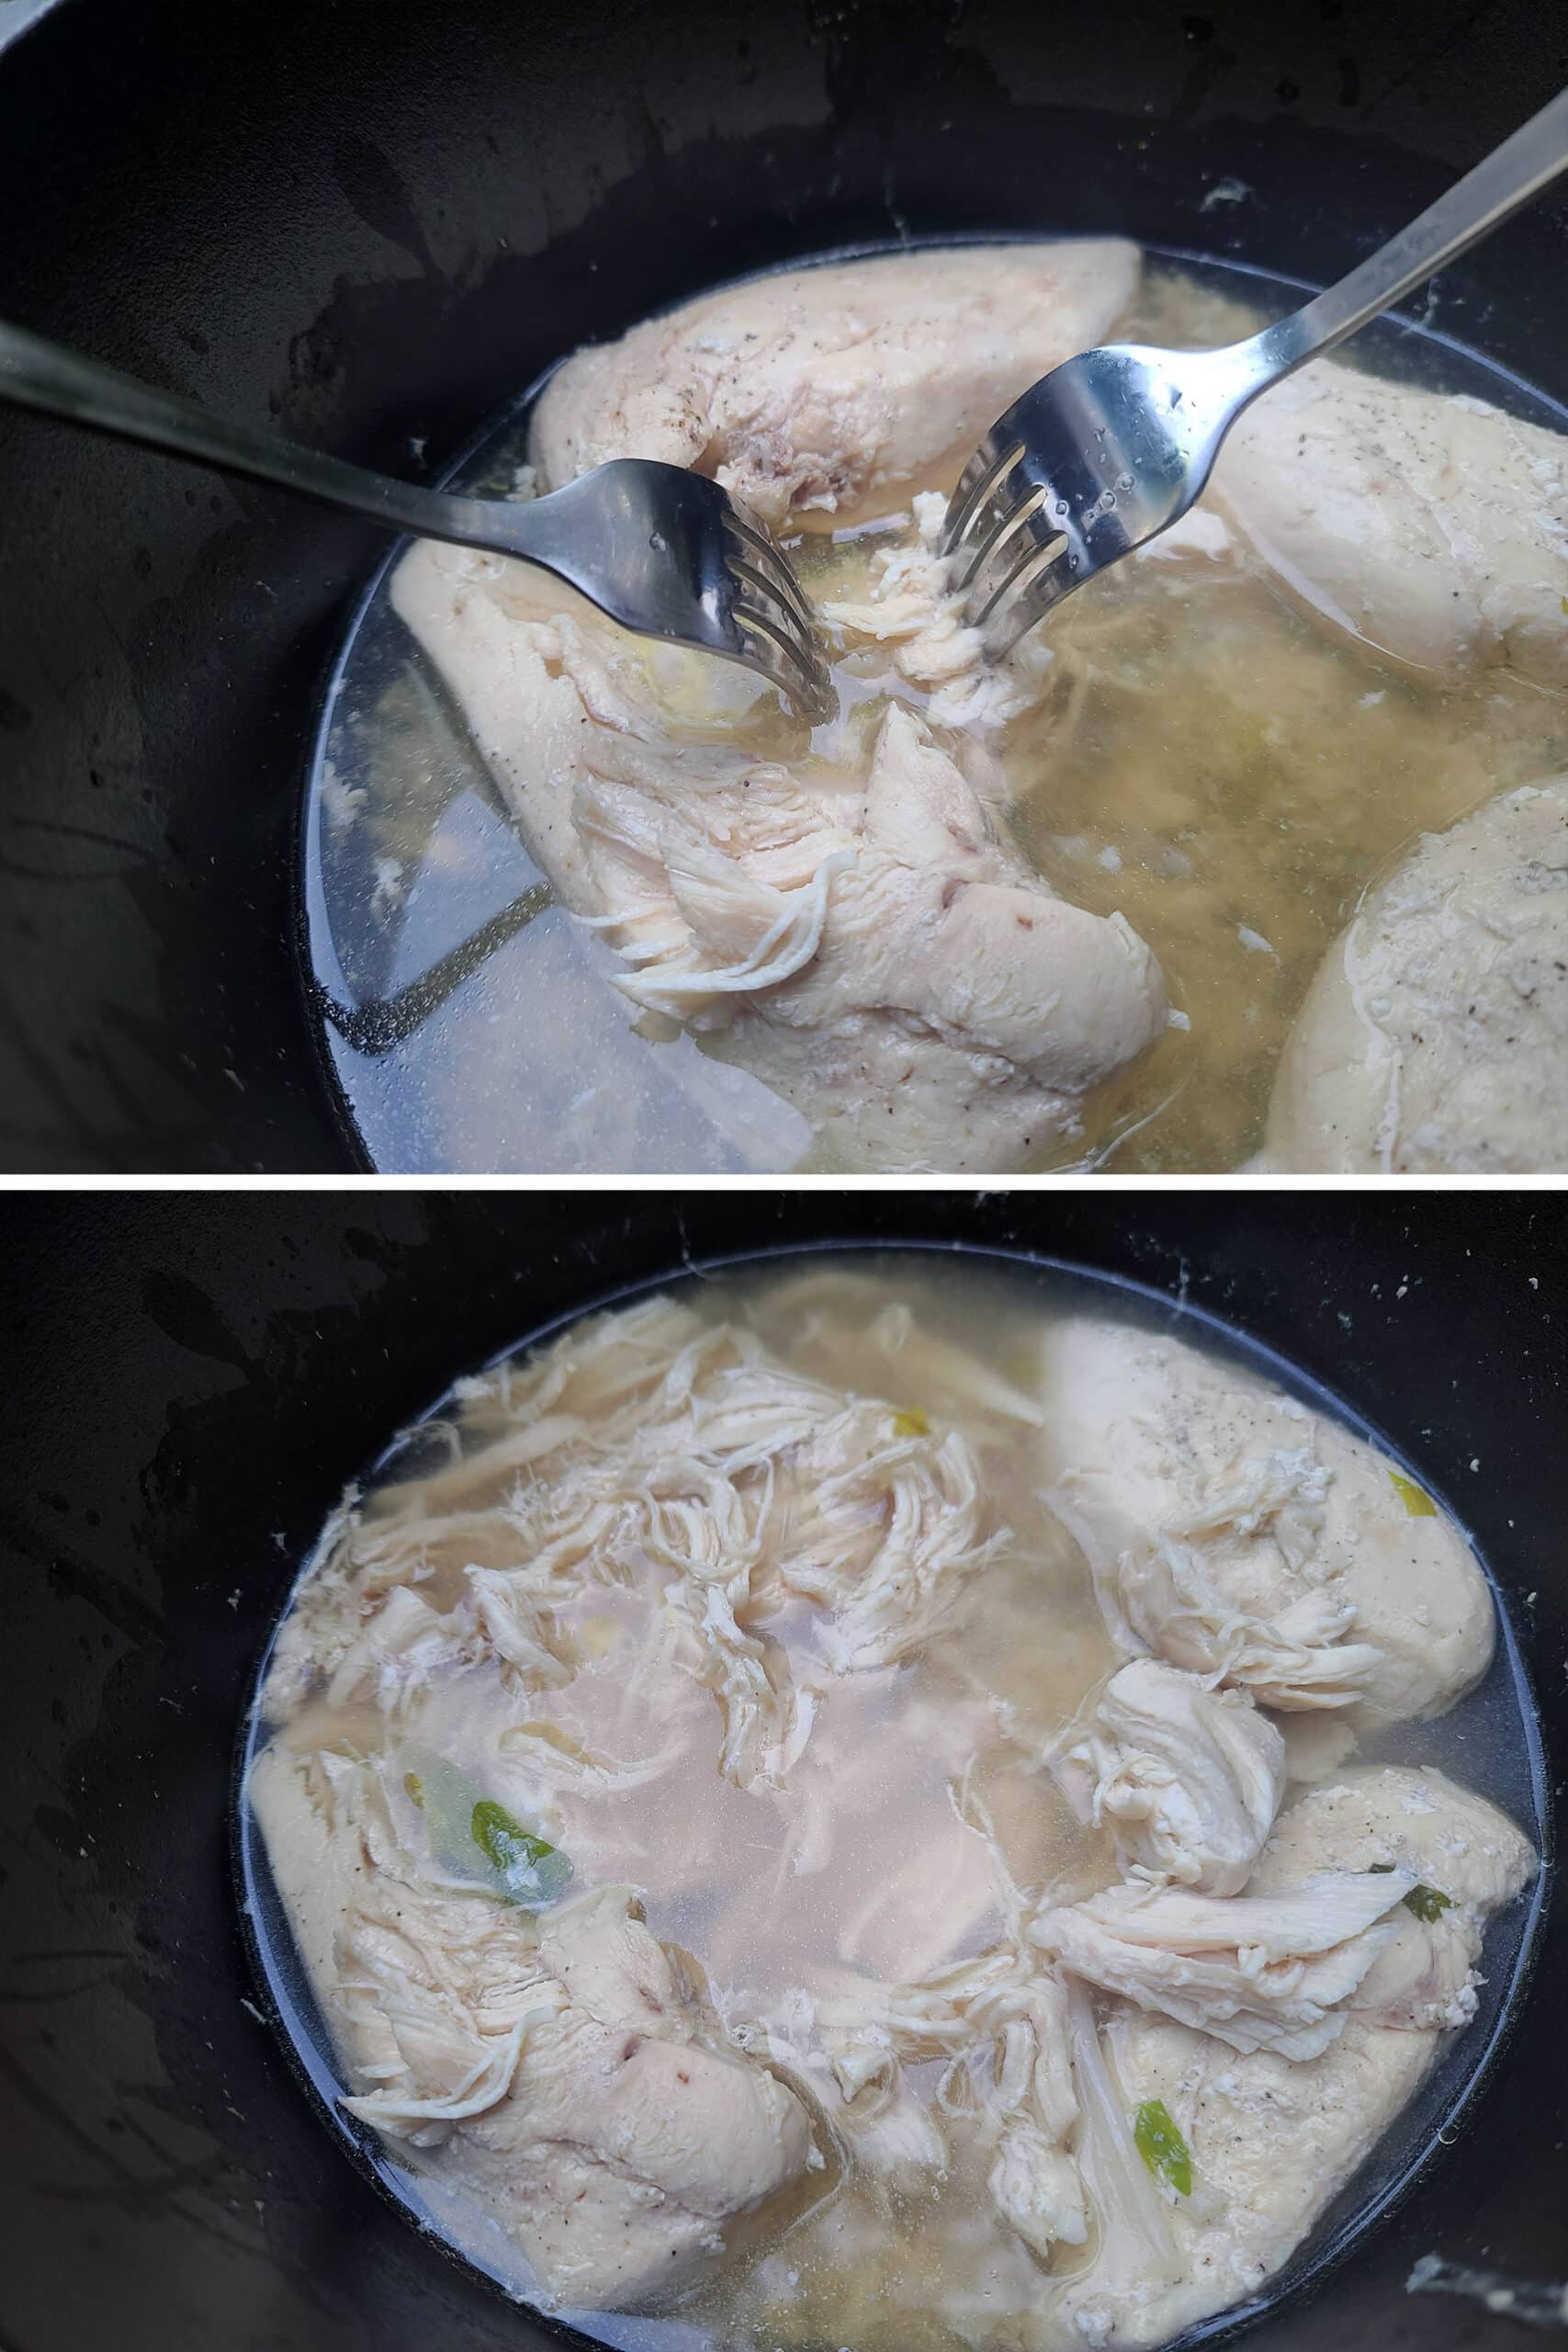 A 2 part image showing 2 forks pulling apart the poached chicken breasts in the dutch oven, surrounded by chicken broth.